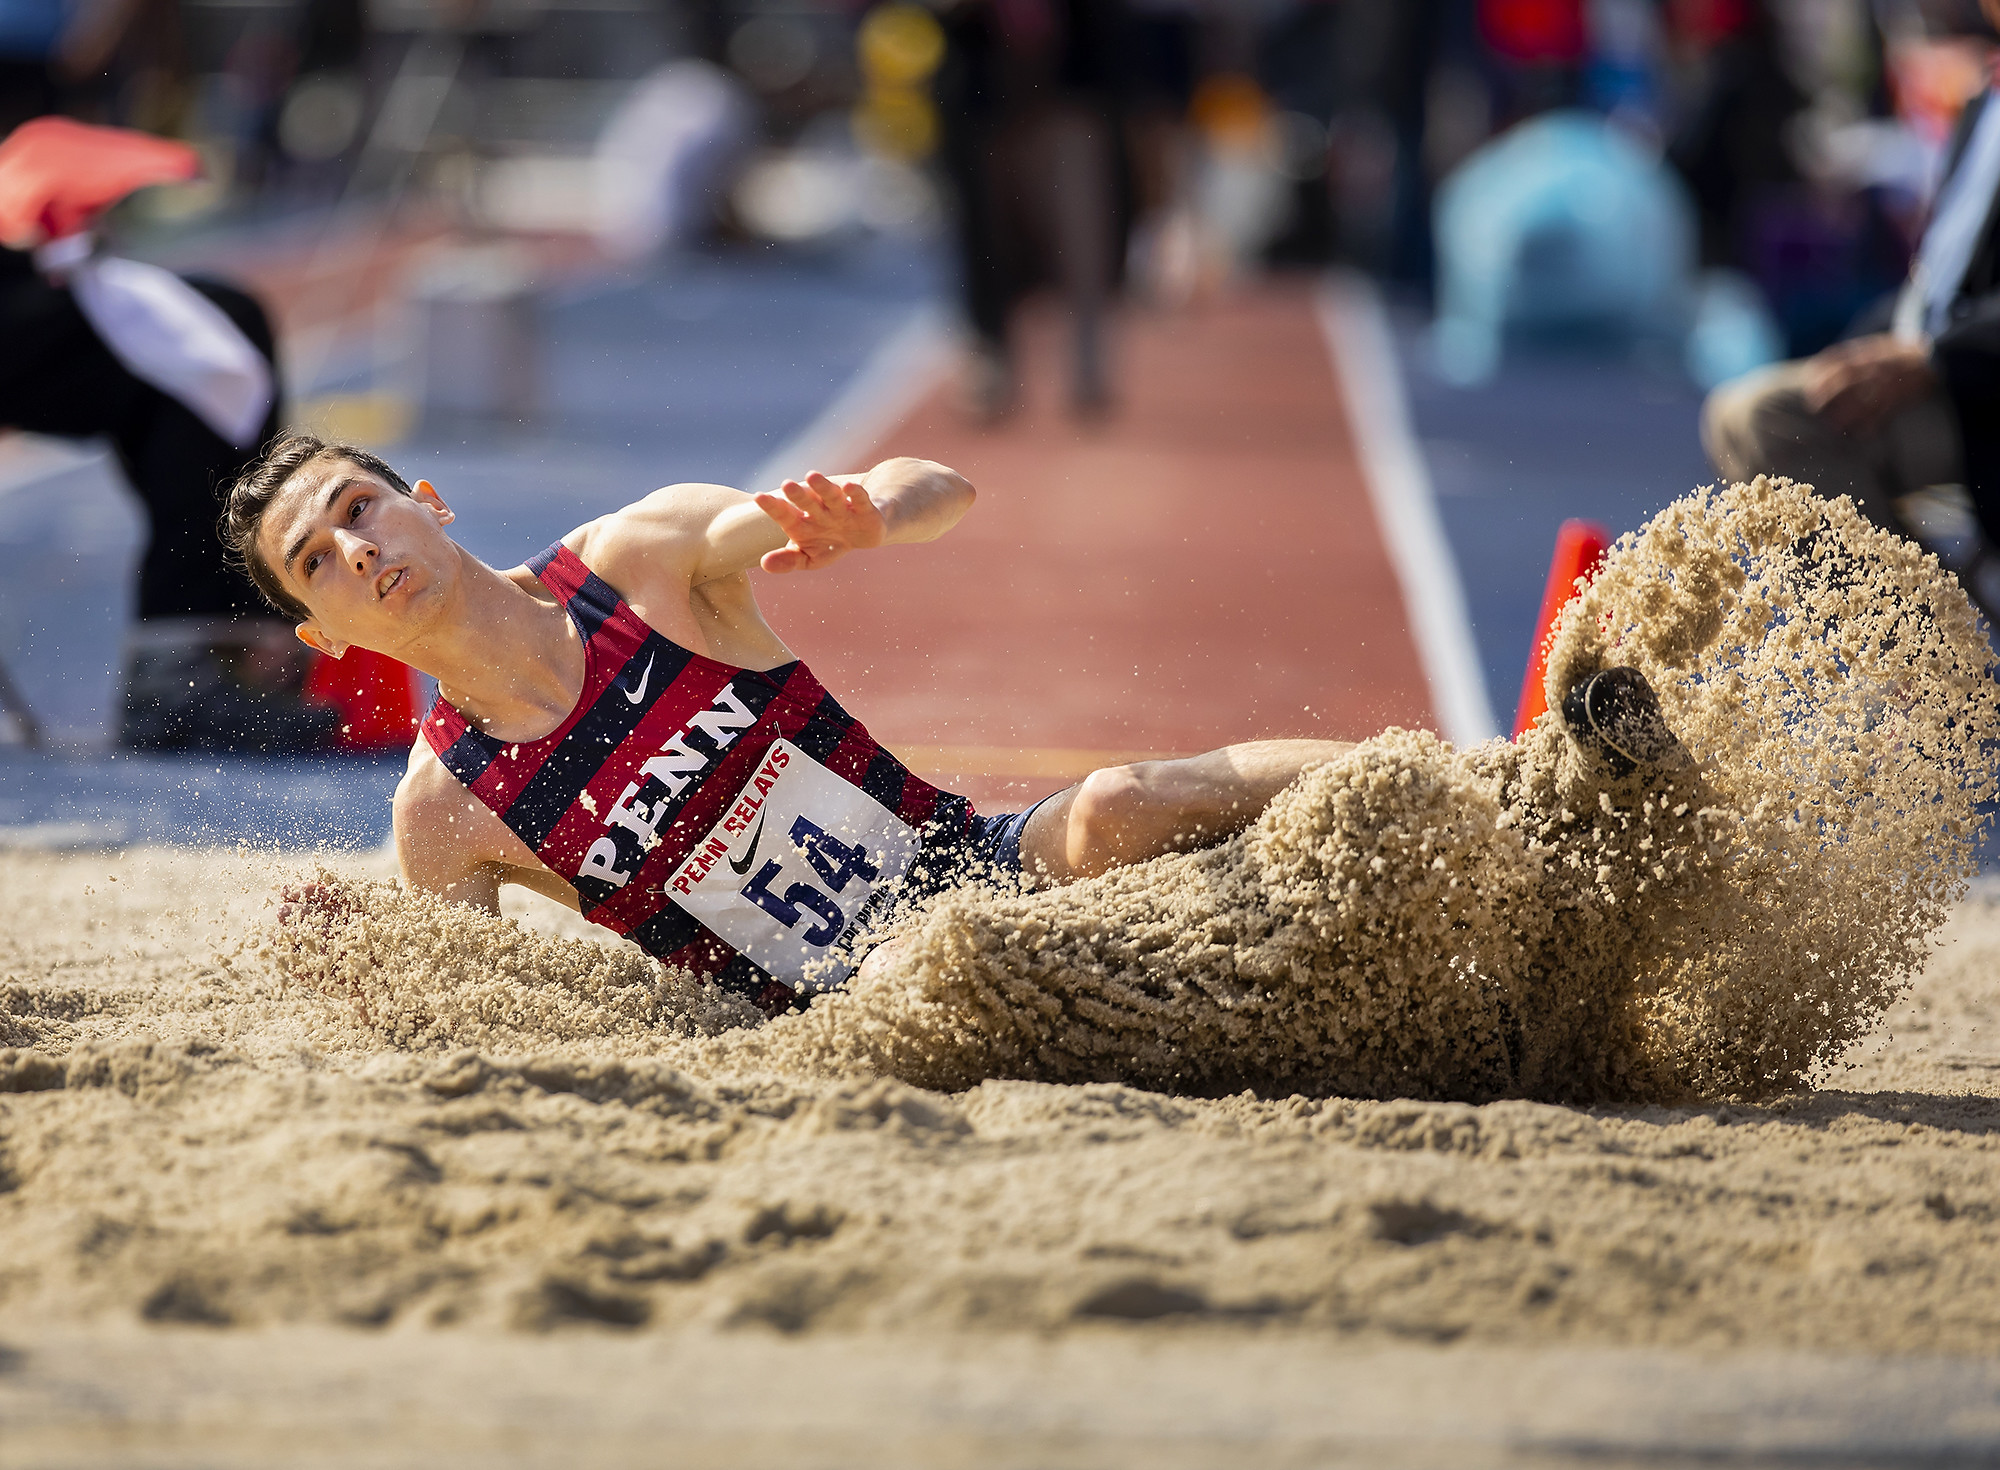 A Penn jumper lands in the dirt after the triple jump.